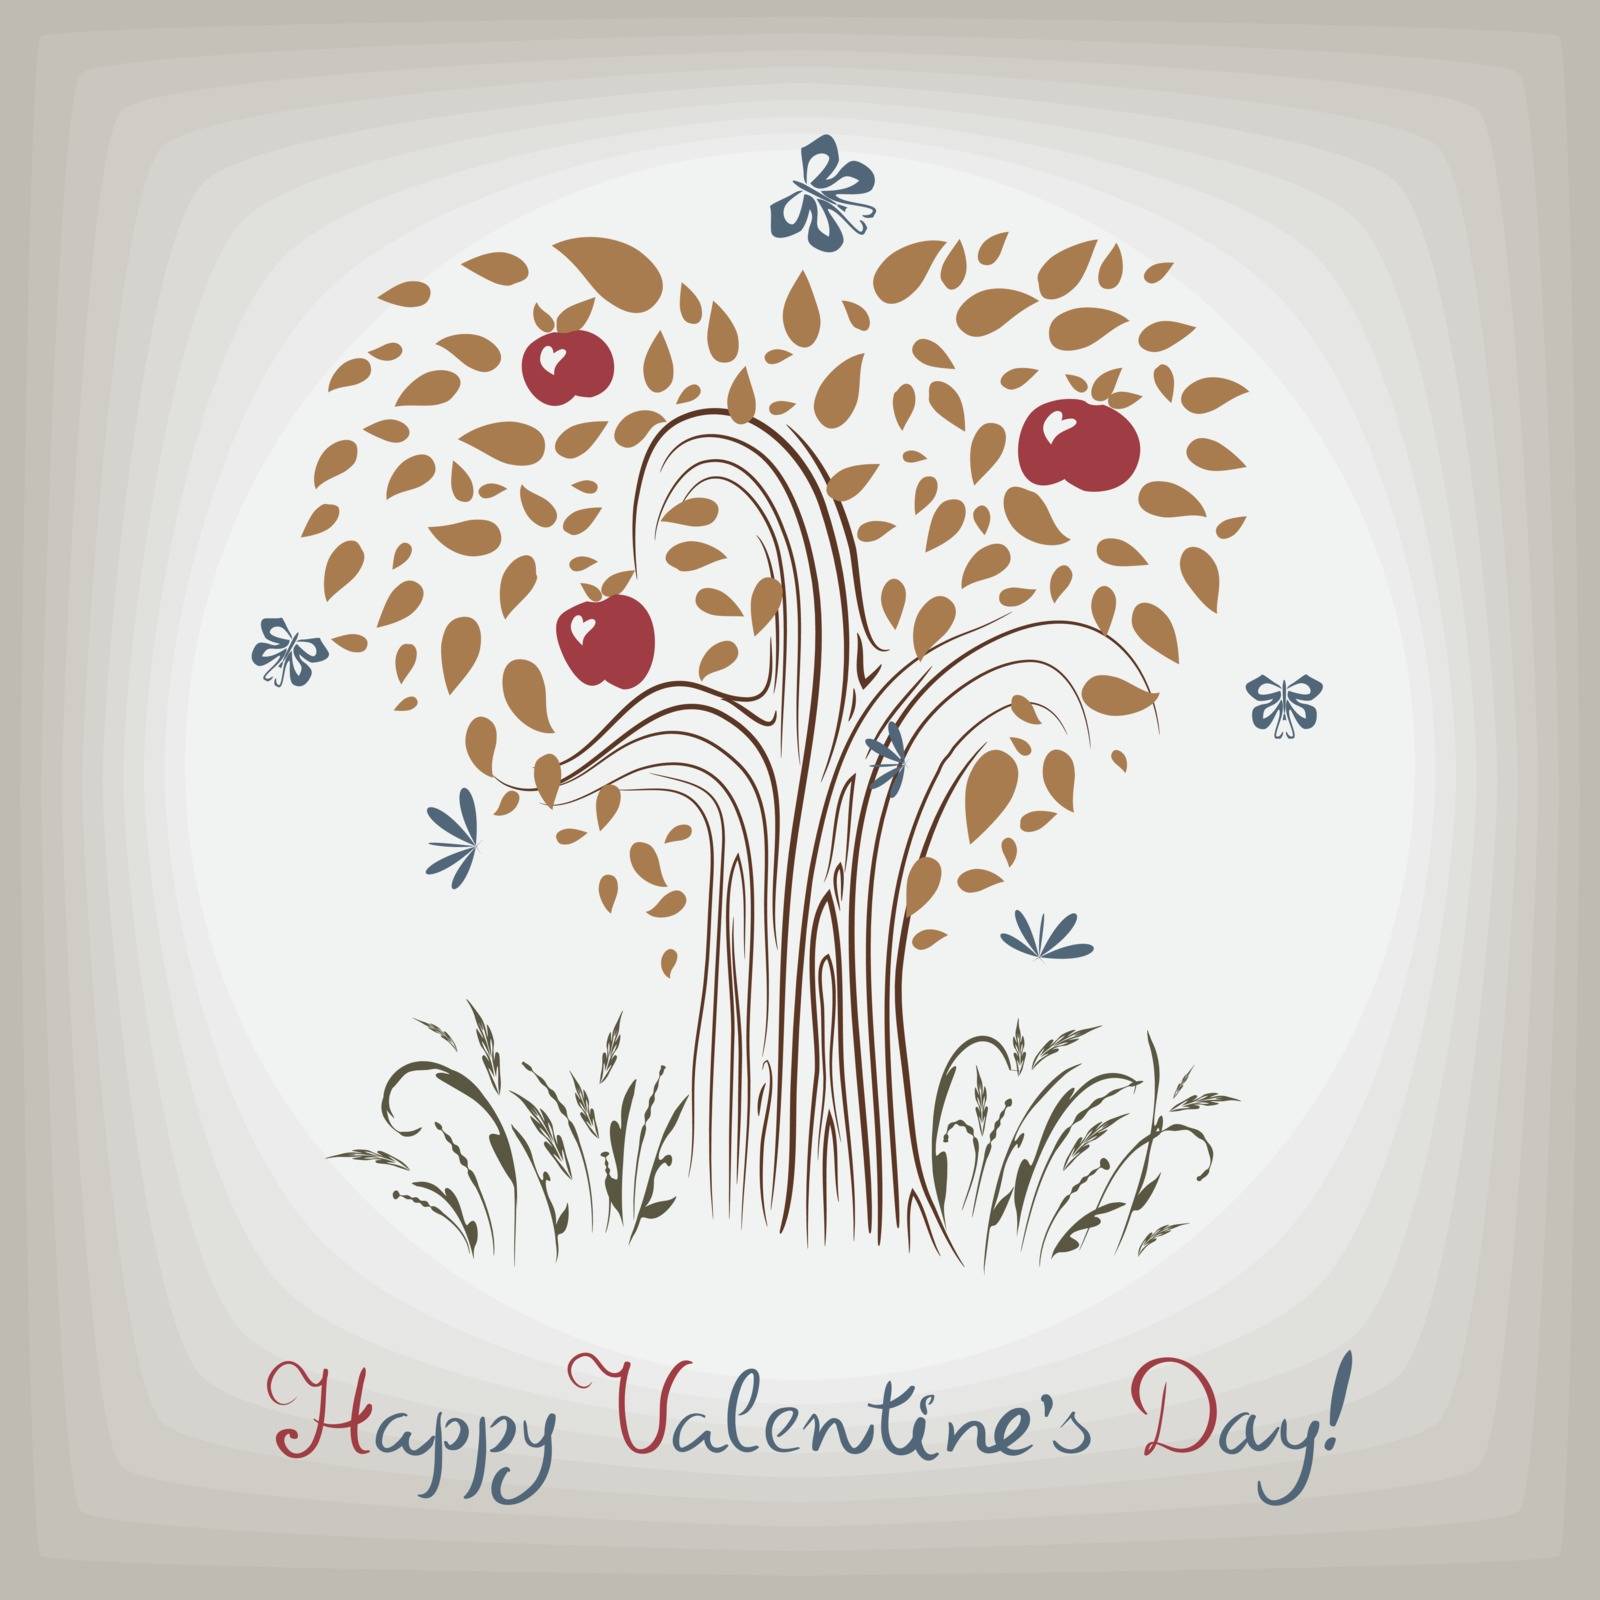 Card with an elegant floral pattern for Valentines Day